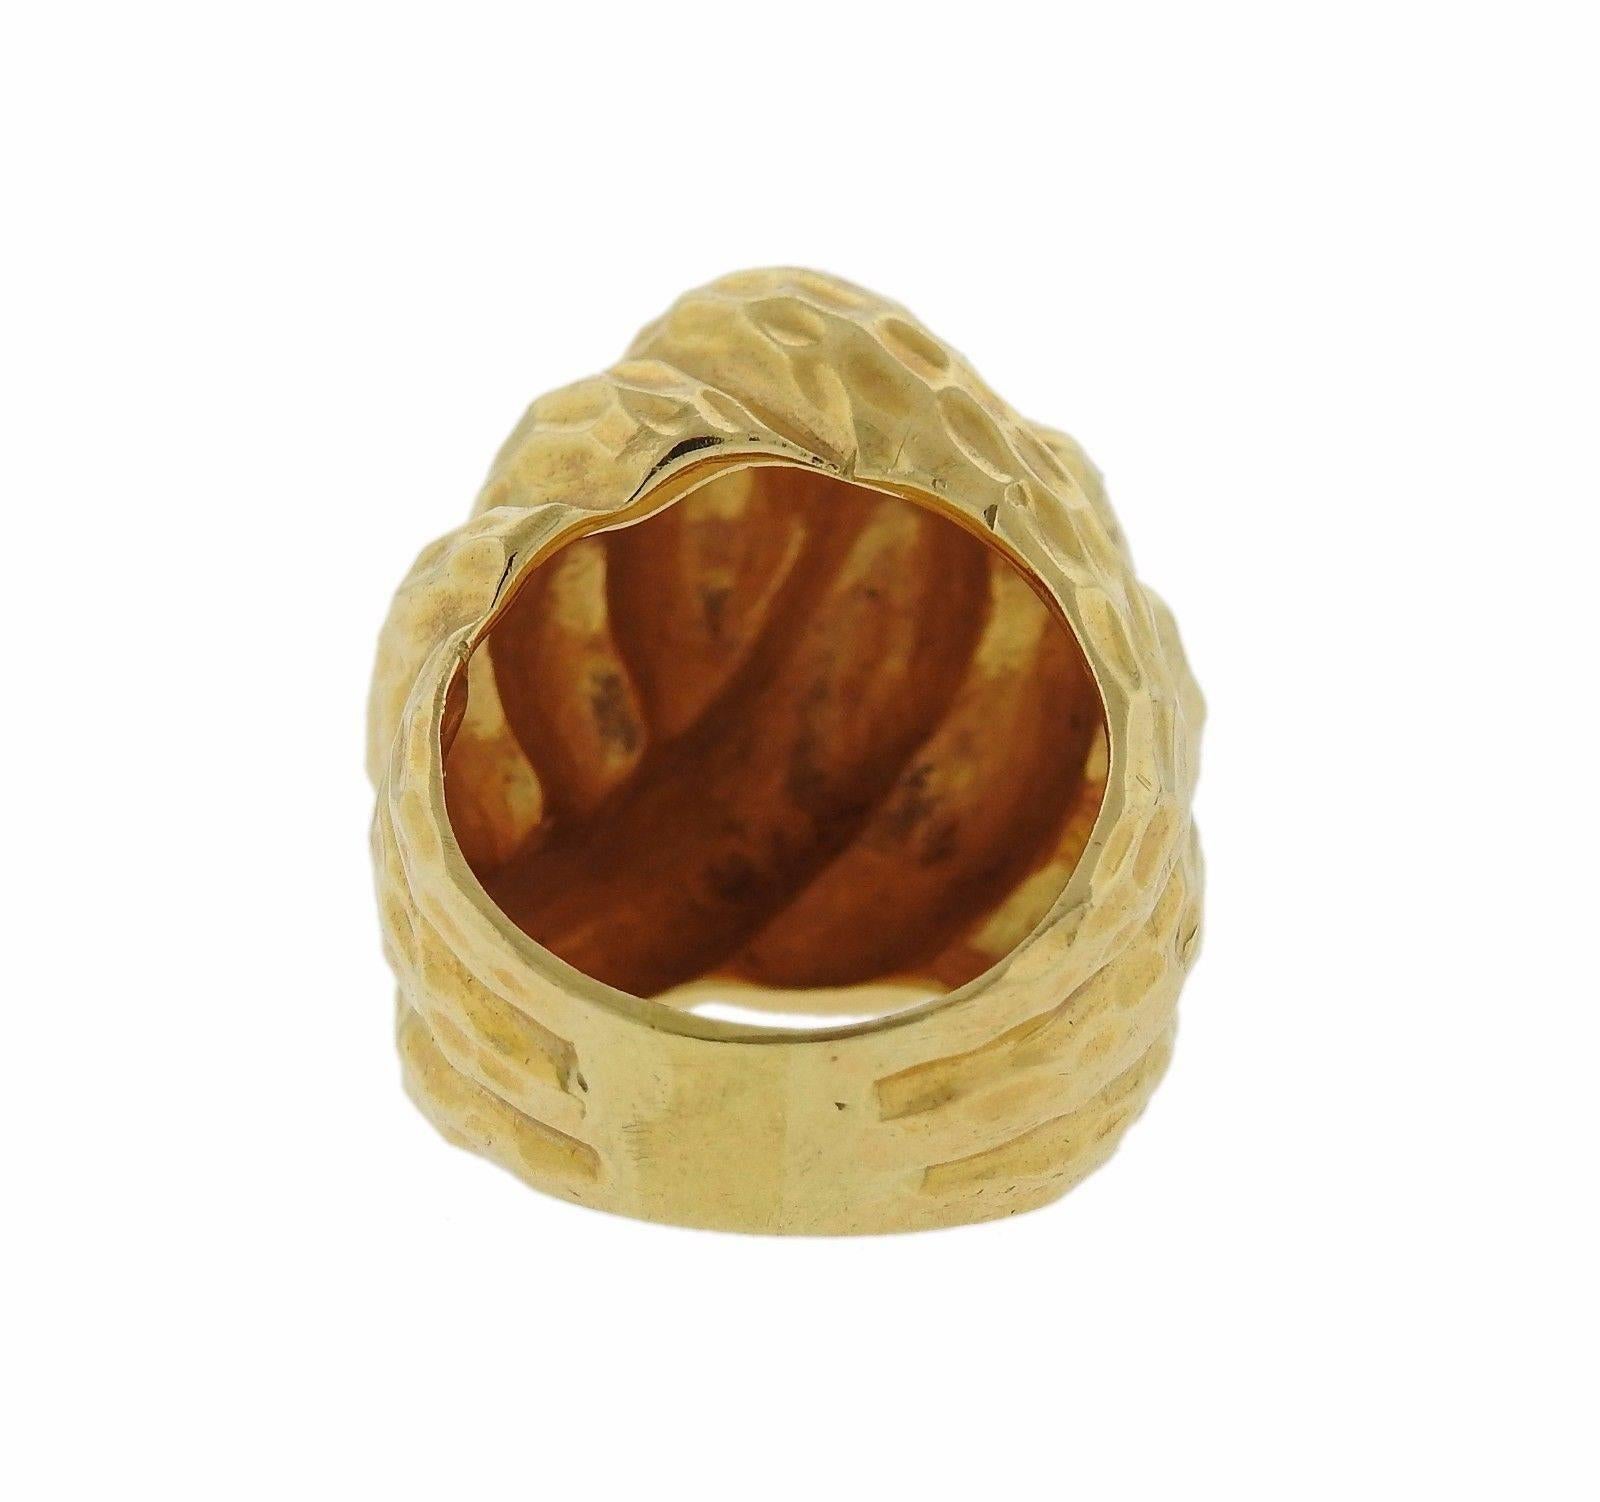 An 18k gold hammered finish dome ring.  The ring is a size 7.  The top of the ring is 22mm x 23mm and sits 13mm from the finger.  The weight of the piece is 24.9 grams.